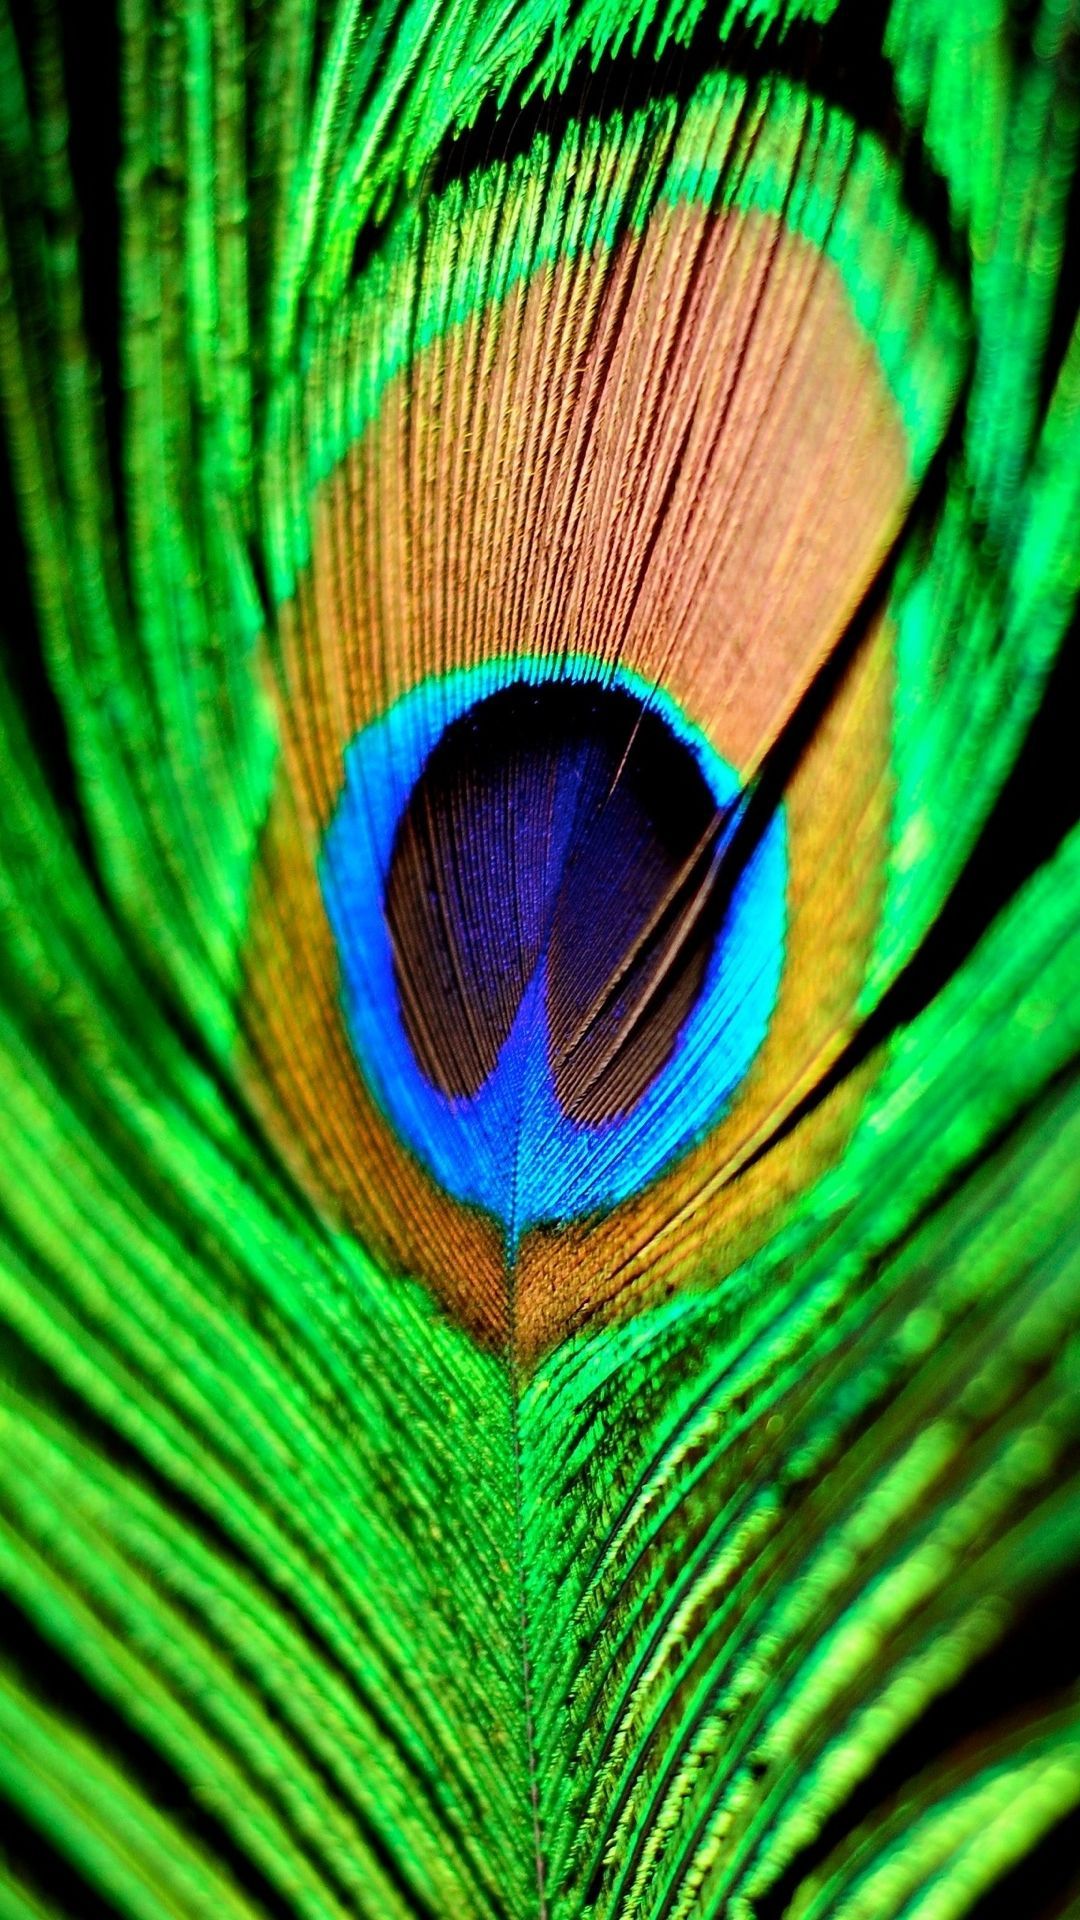 1080x1920 Peacock Feather Green Blue Iphone 6 Plus Hd Wallpaper Feather Wallpaper Iphone Feather Wallpaper Hd Phone Wallpaper